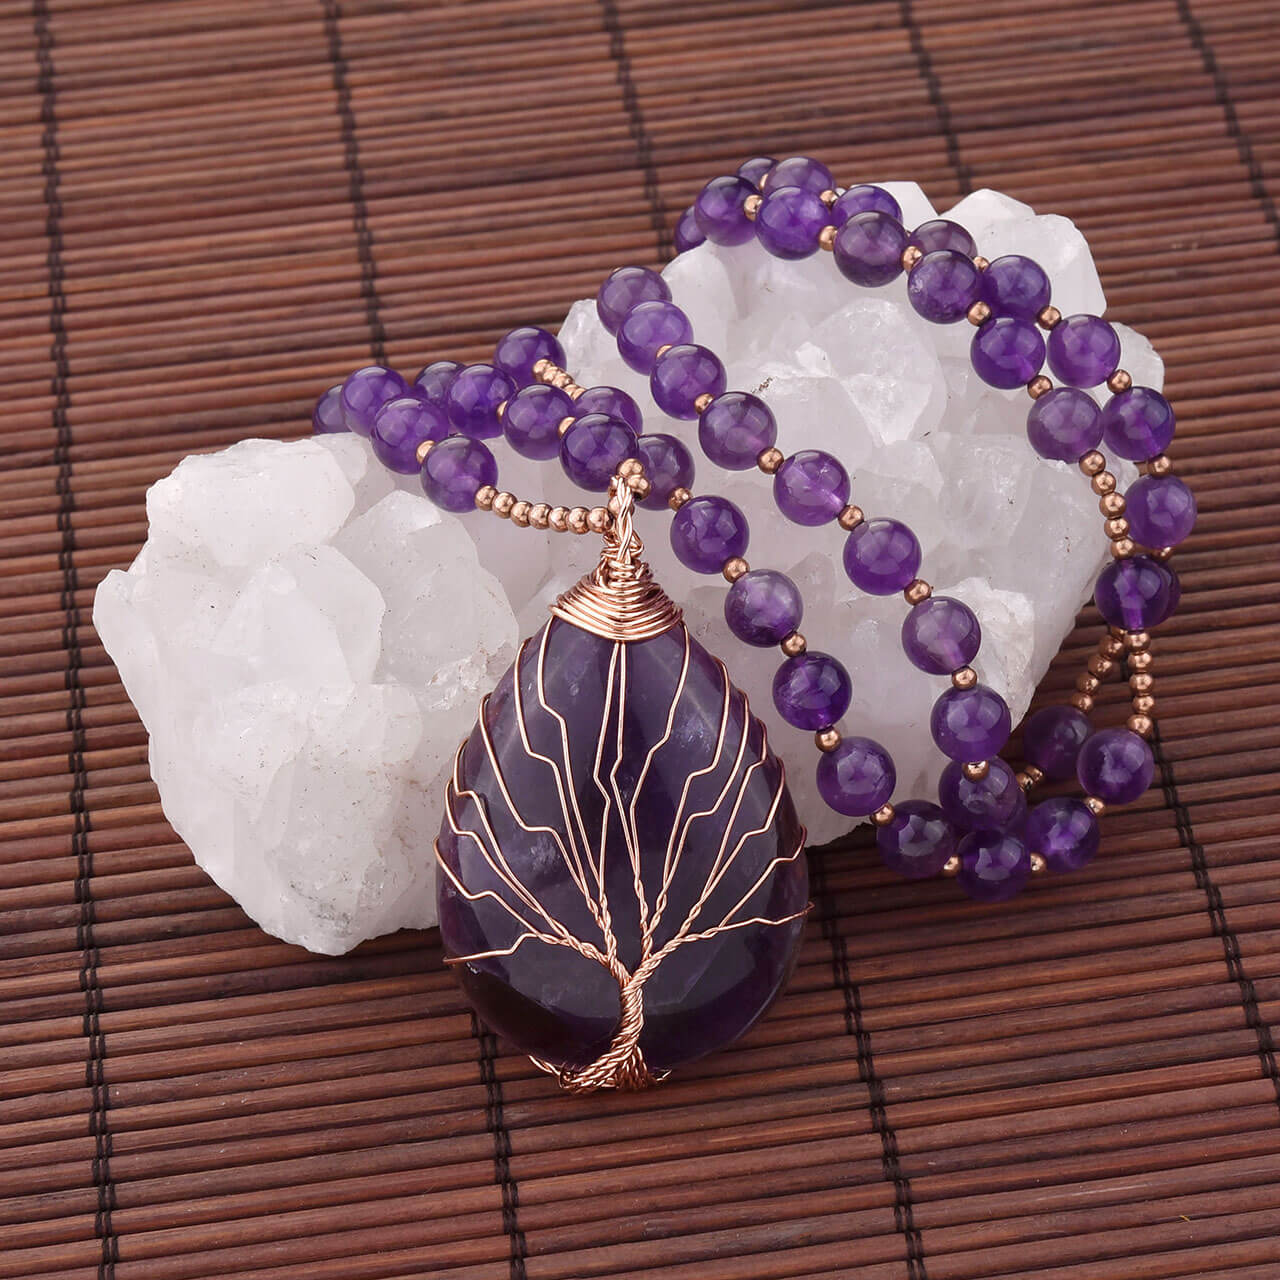 Jovivi healing crystals pendant necklace for women handmade tree of life wire wrapped pendant, jjn07140